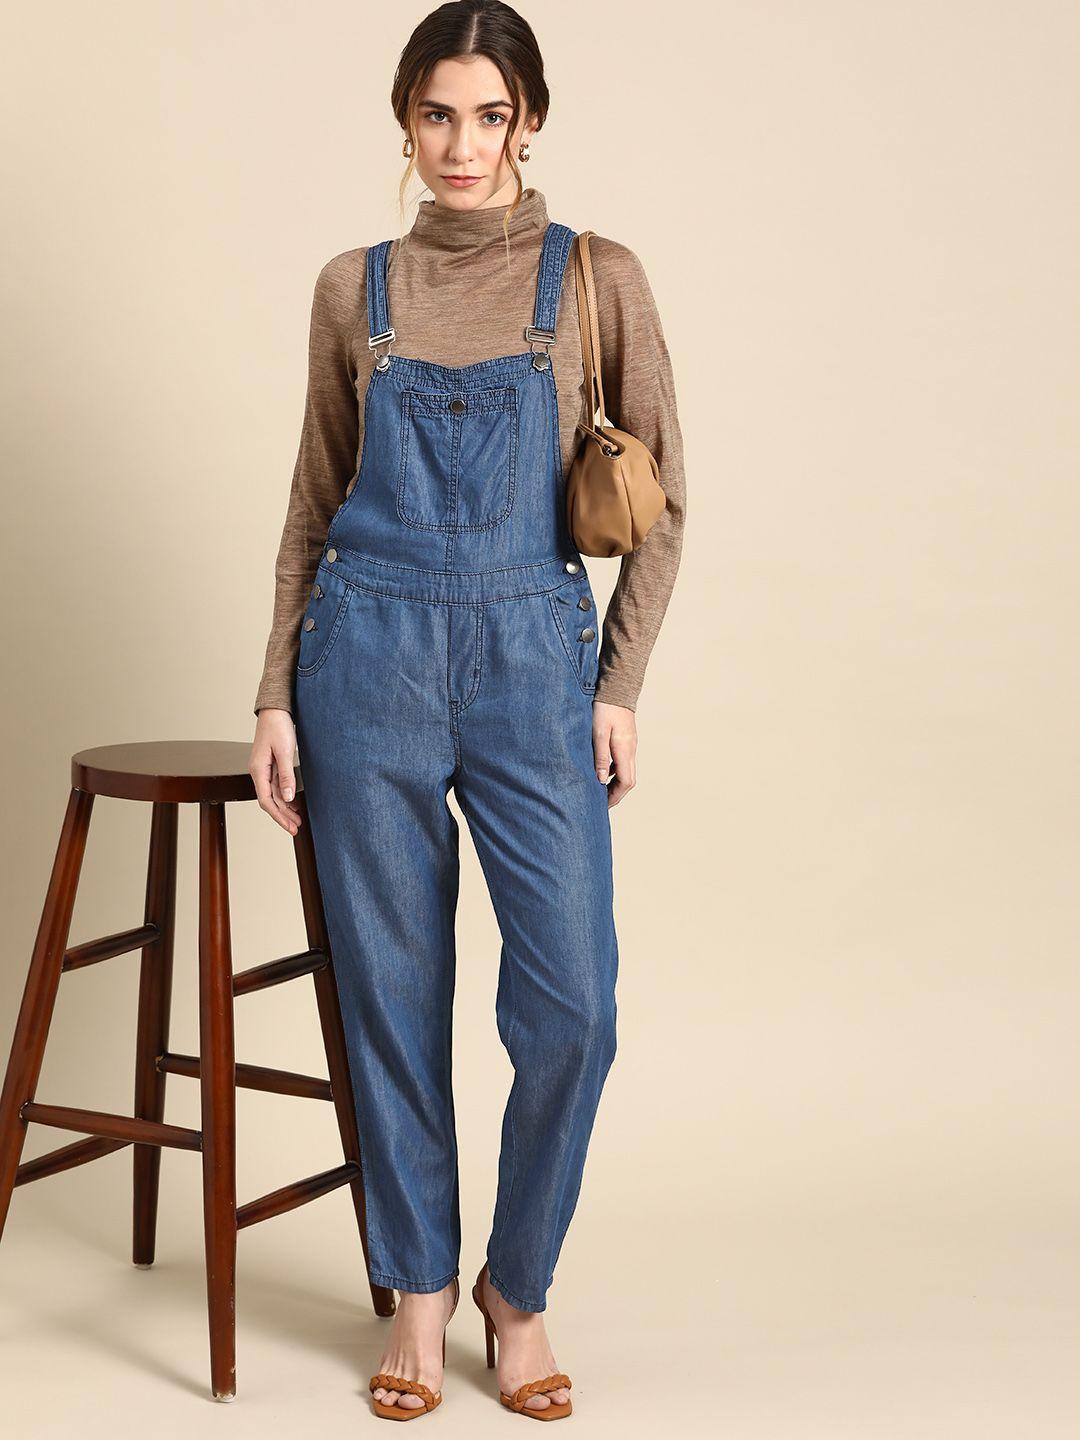 all about you women navy blue denim dungarees